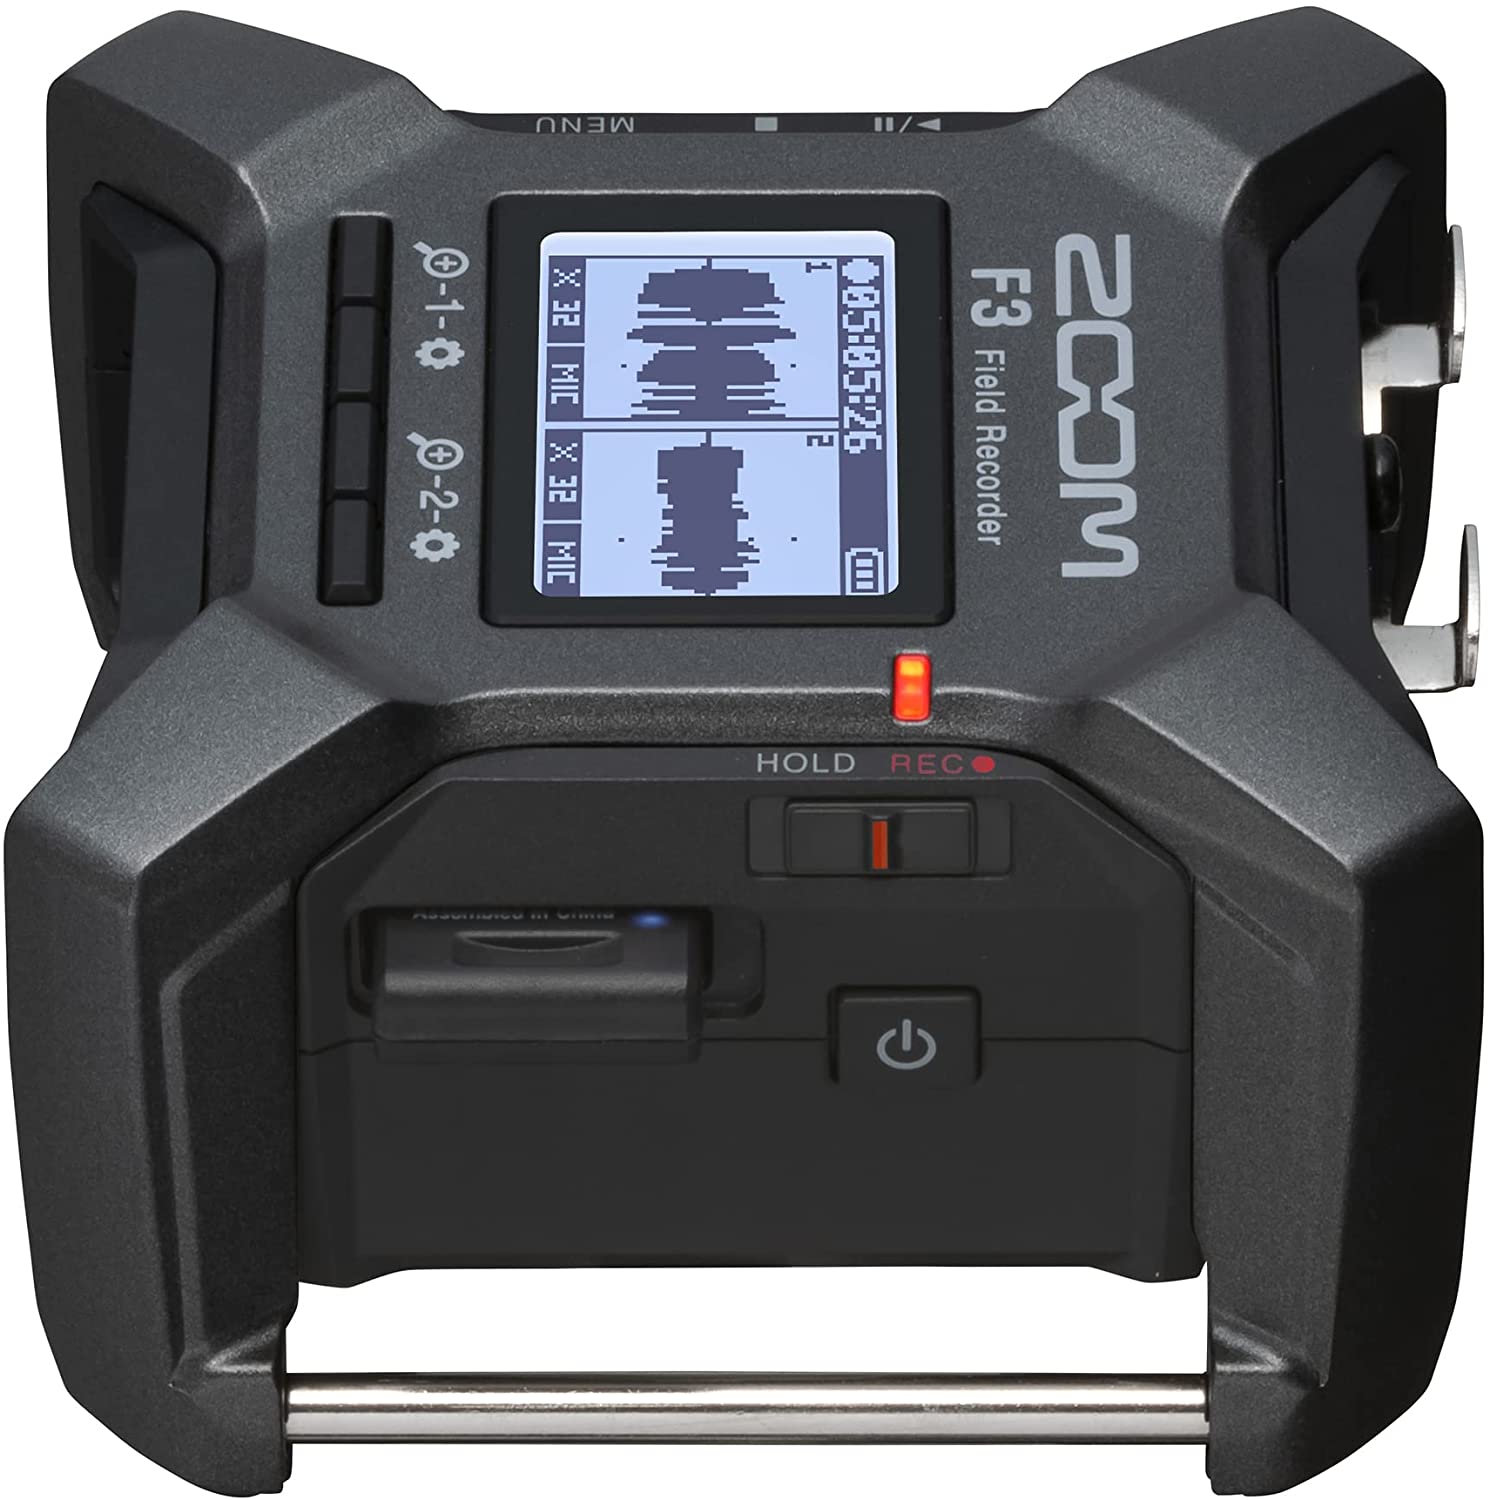 First look: Zoom F3 2-track 32-bit float recorder with 48 kHz sampling rate 19